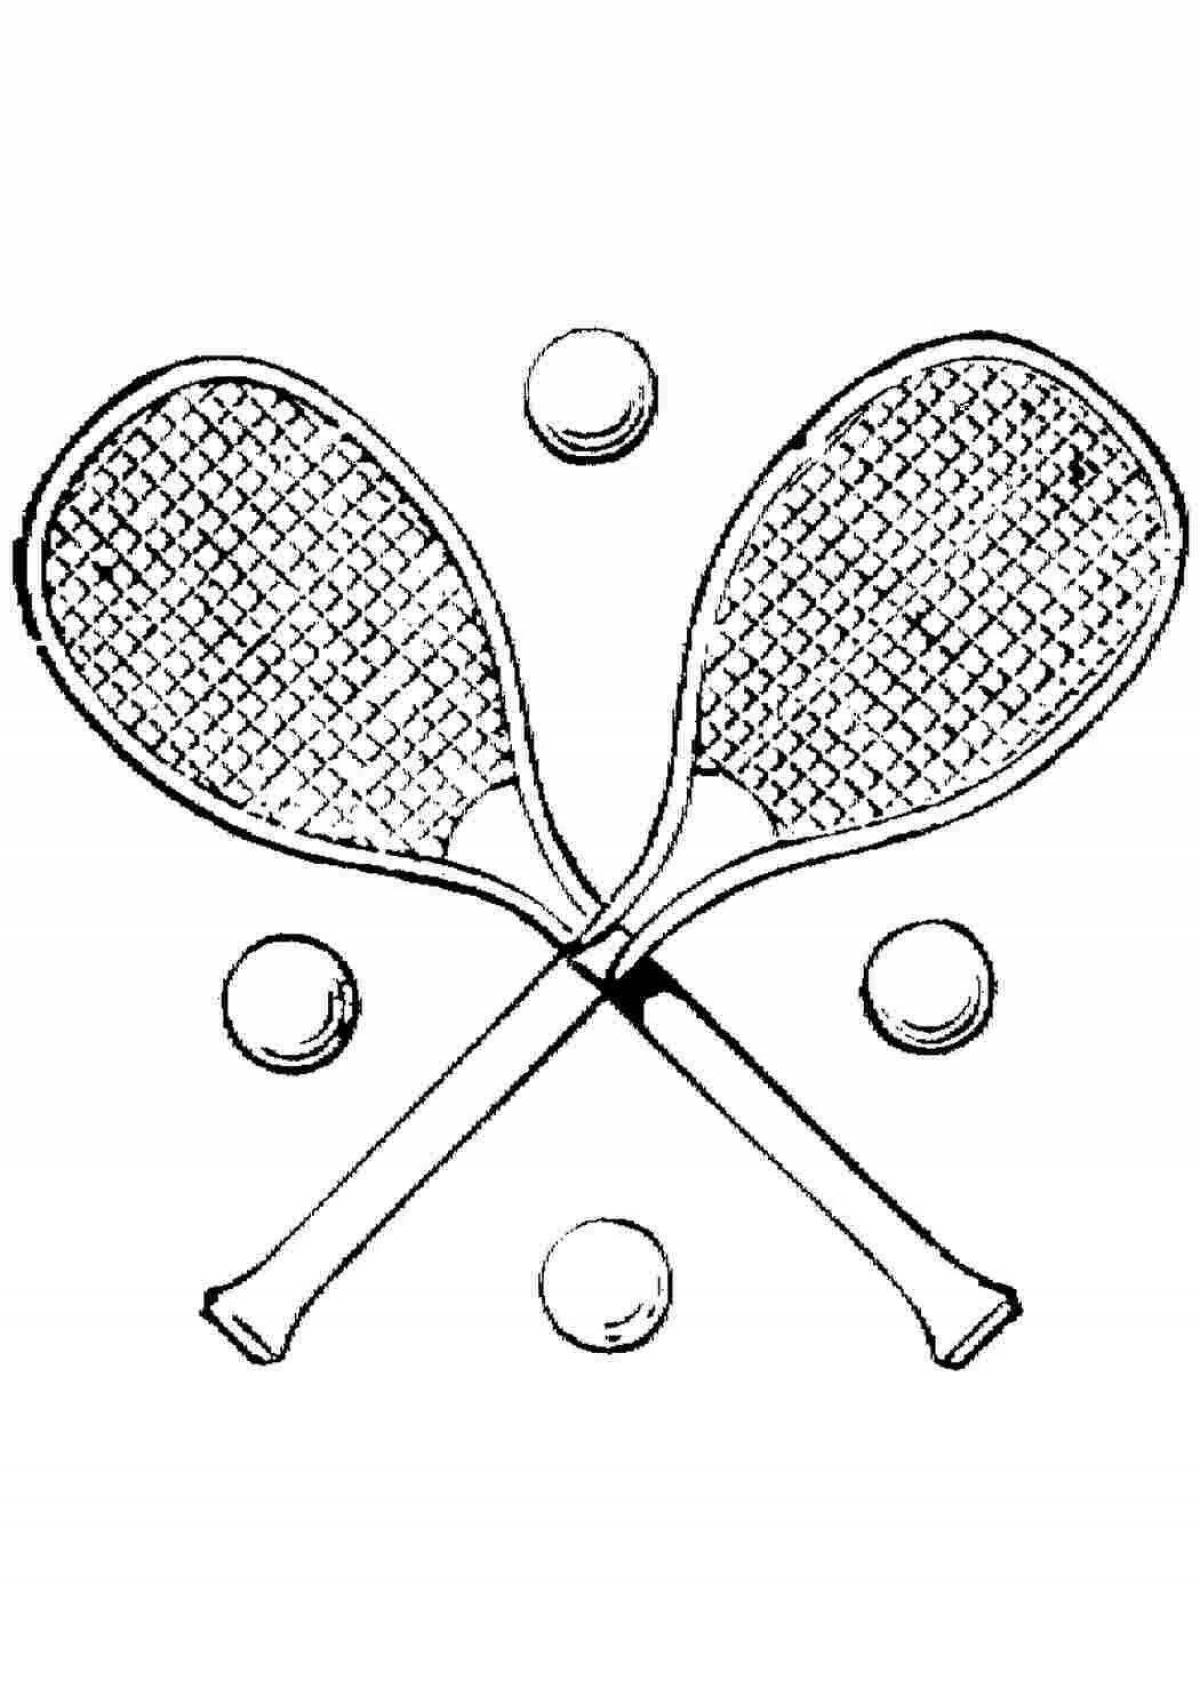 Shiny tennis racket coloring page